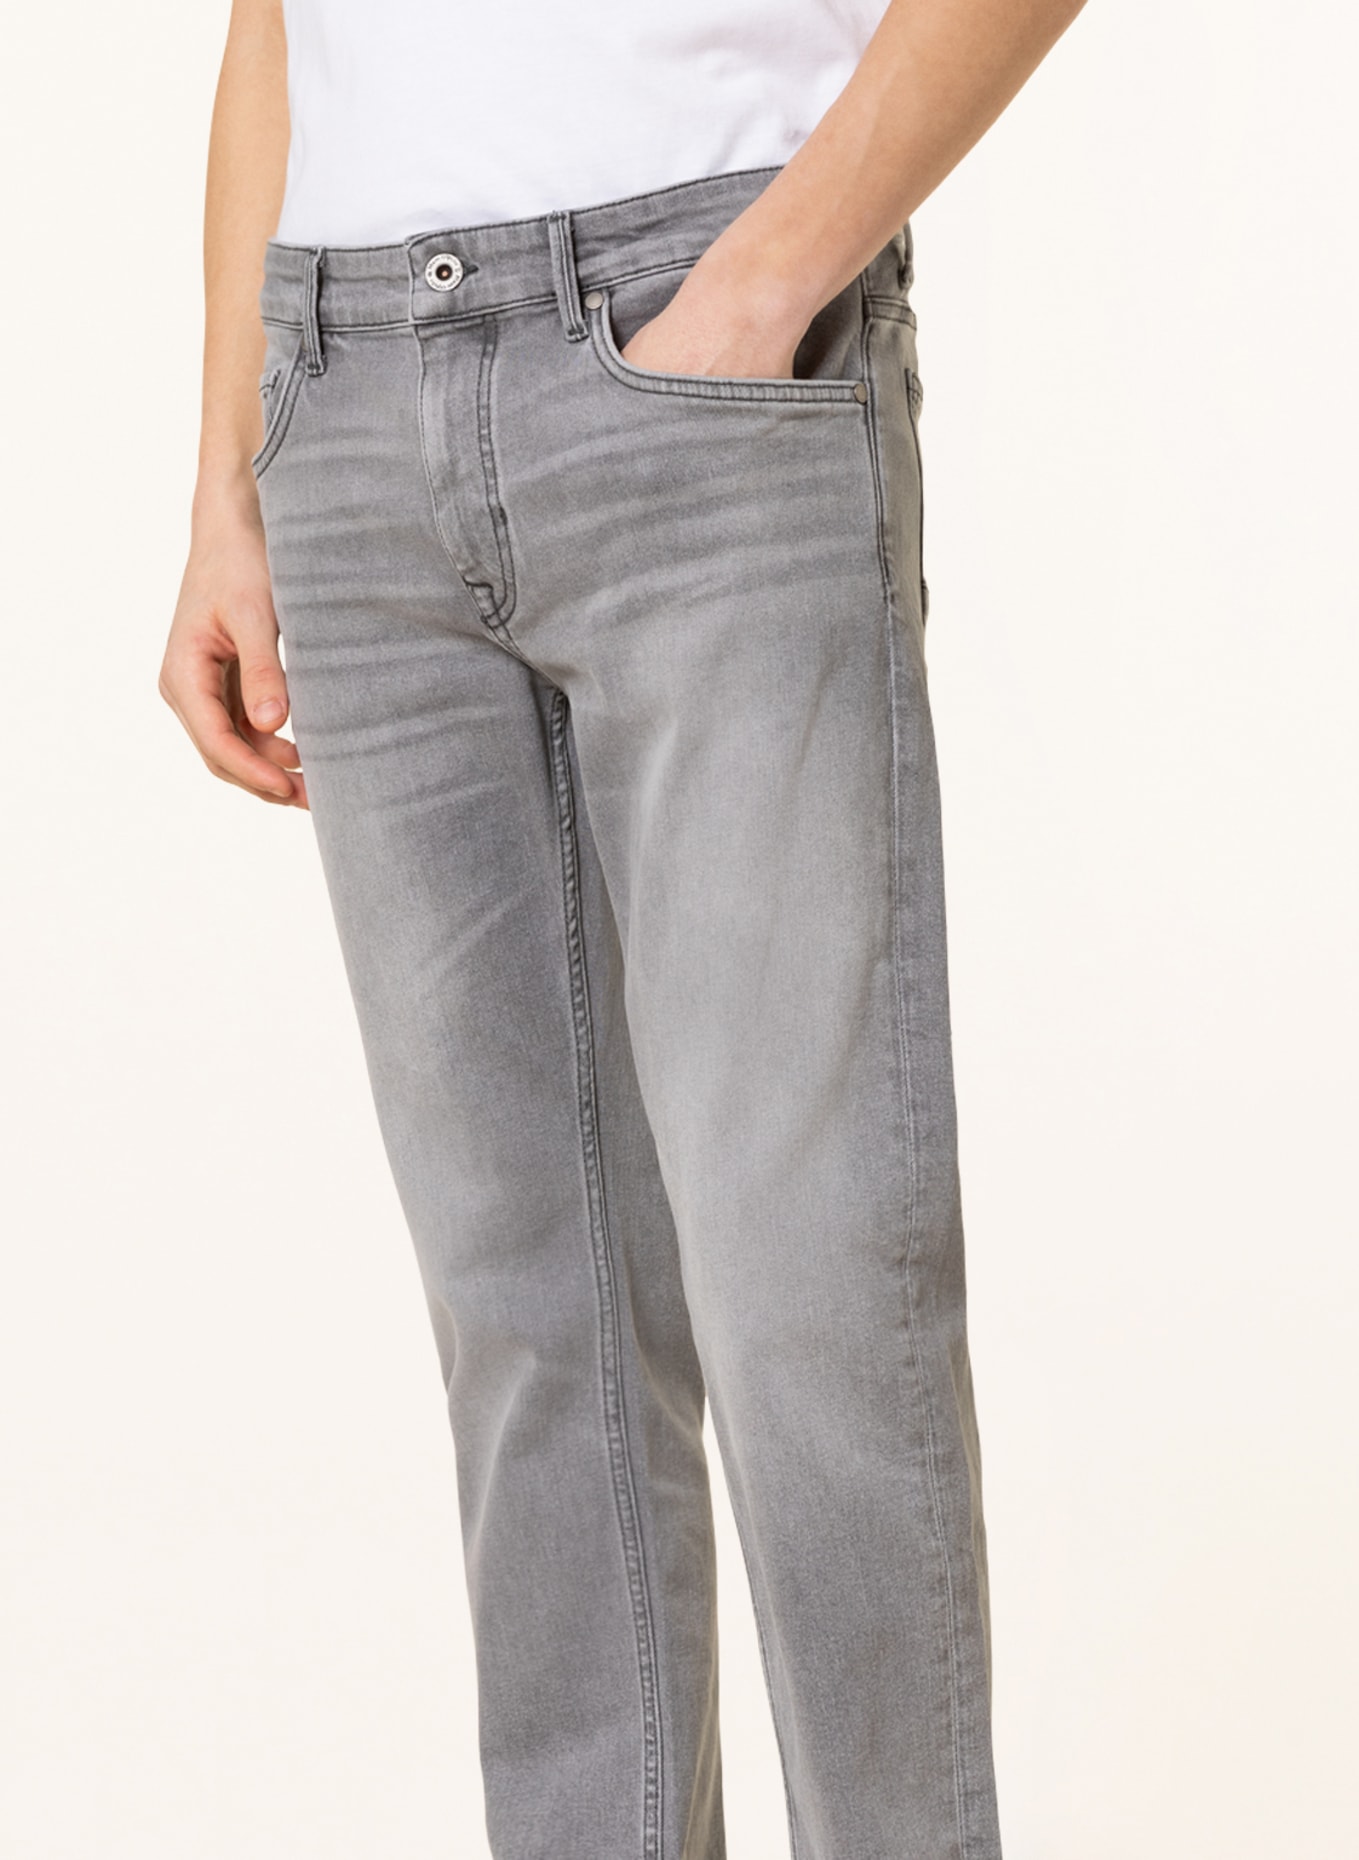 Marc O'Polo Jeans shaped fit, Color: 021 Light grey wash (Image 5)